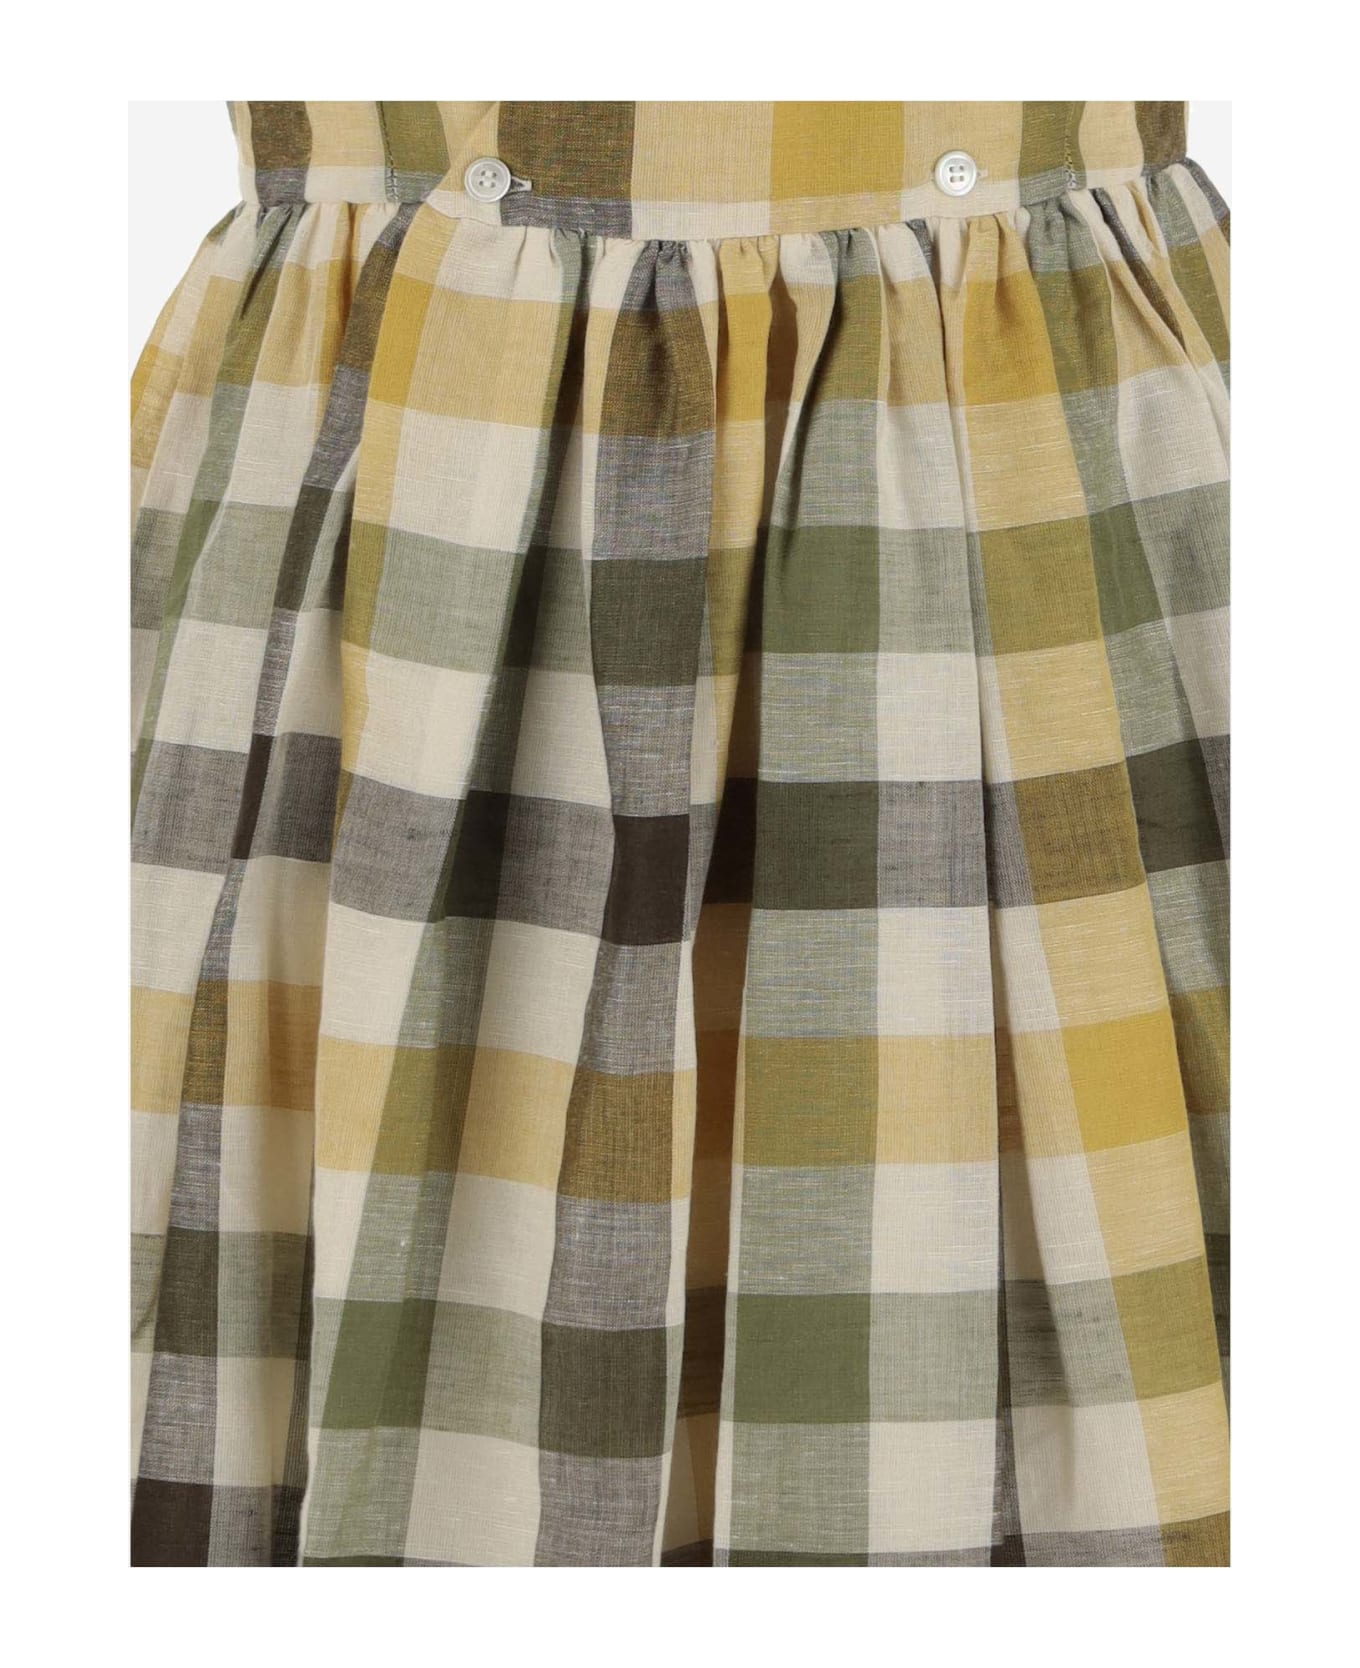 Bonpoint Linen And Cotton Dress With Check Pattern - MULTICOLOR